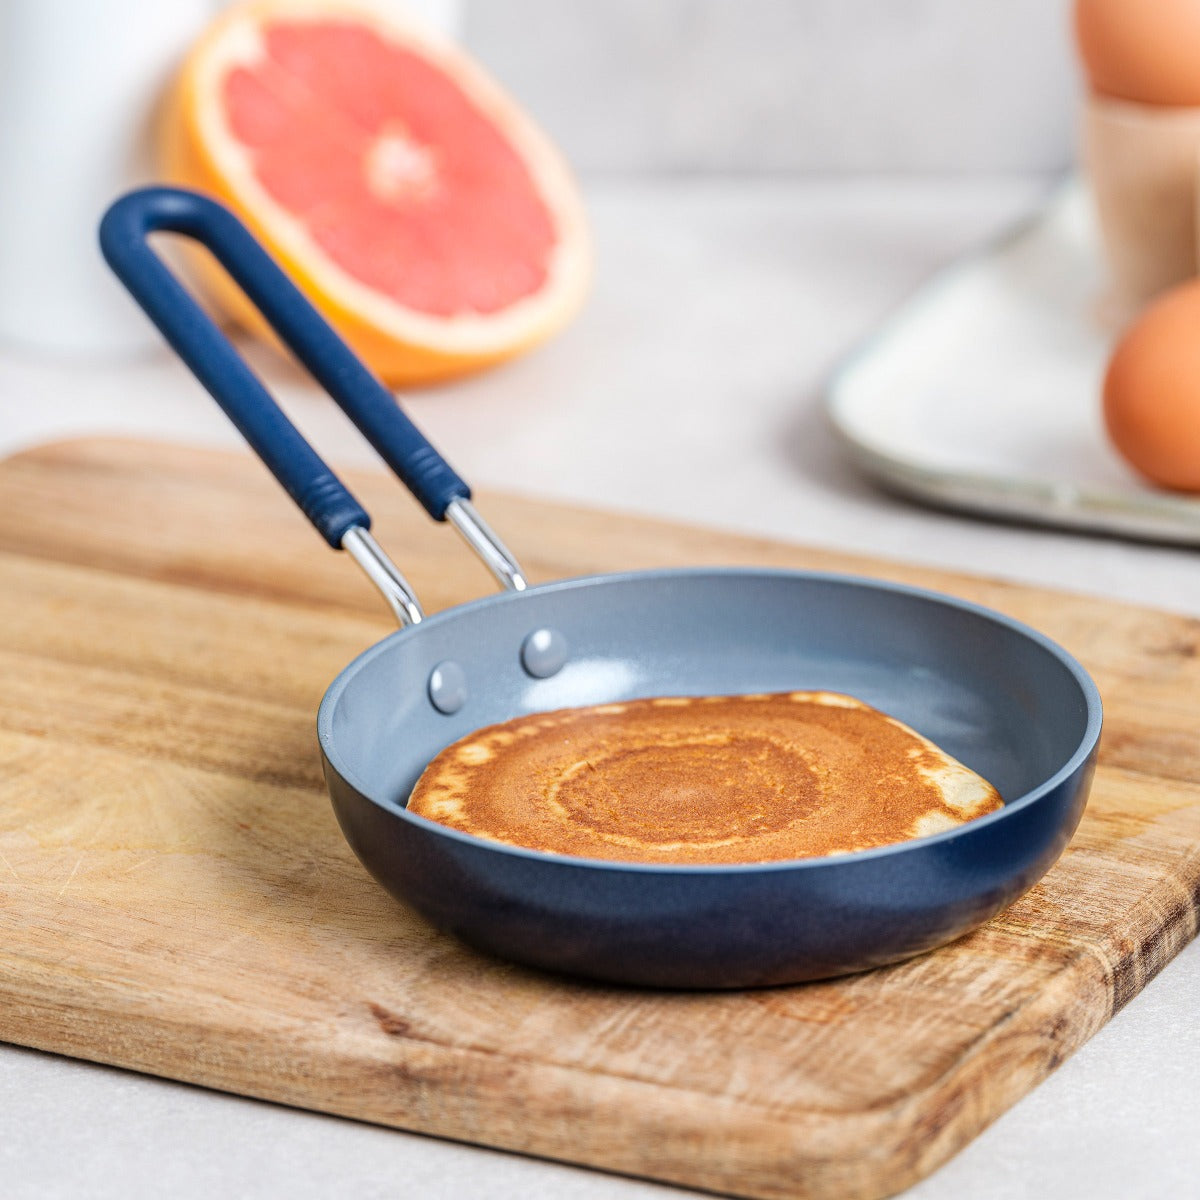 Iron Small Egg Pan Nonstick Frying Pan Kitchen Cooking Tool With